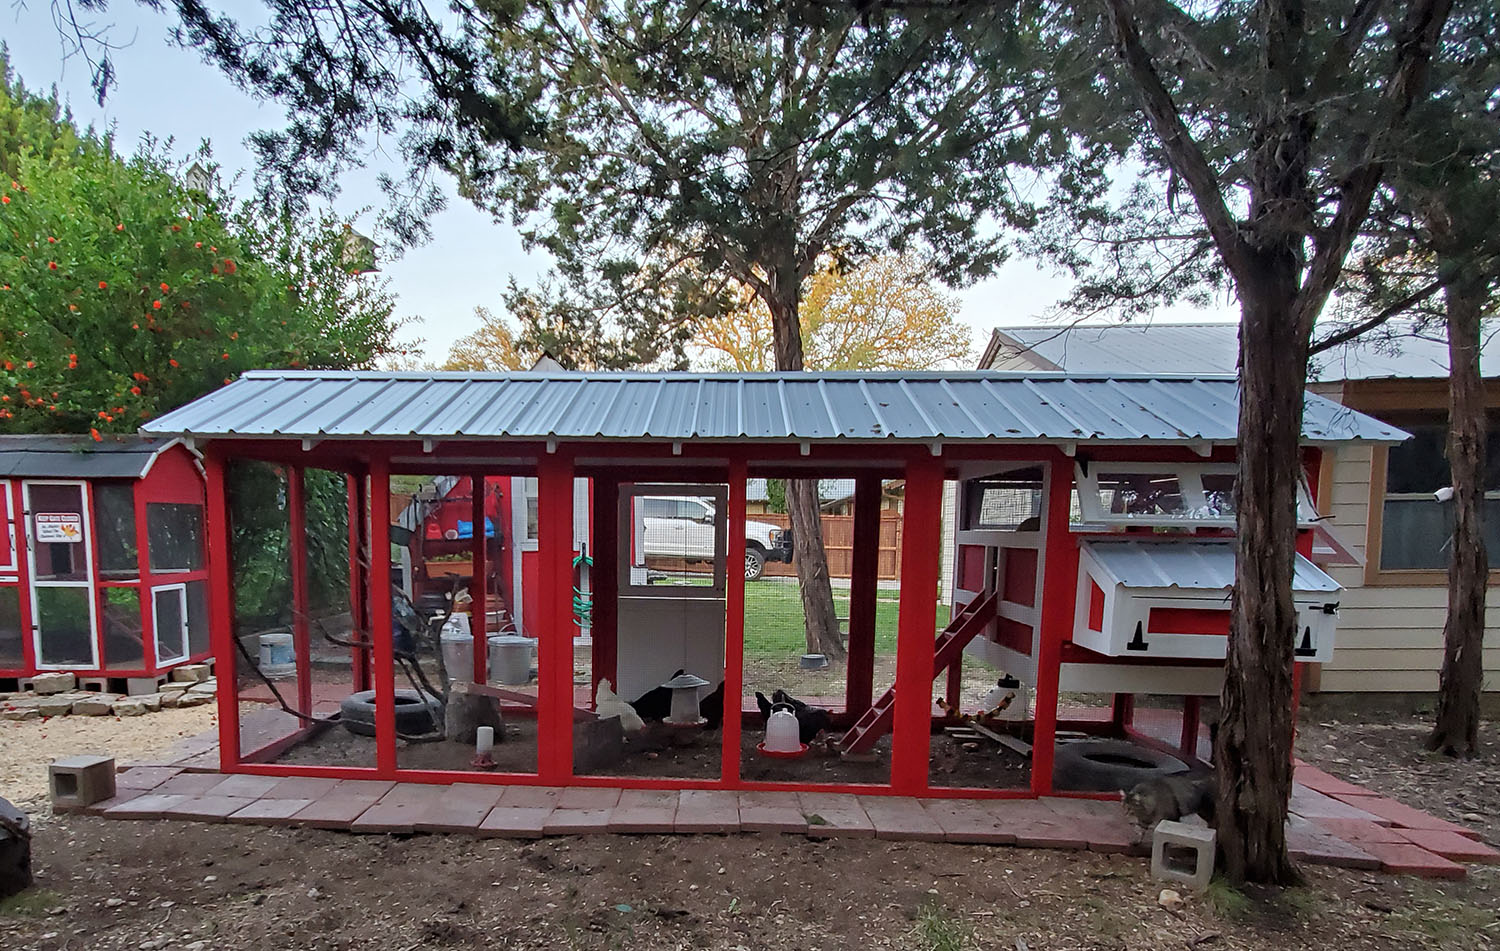 6’x18′ American Coop painted red with white trim